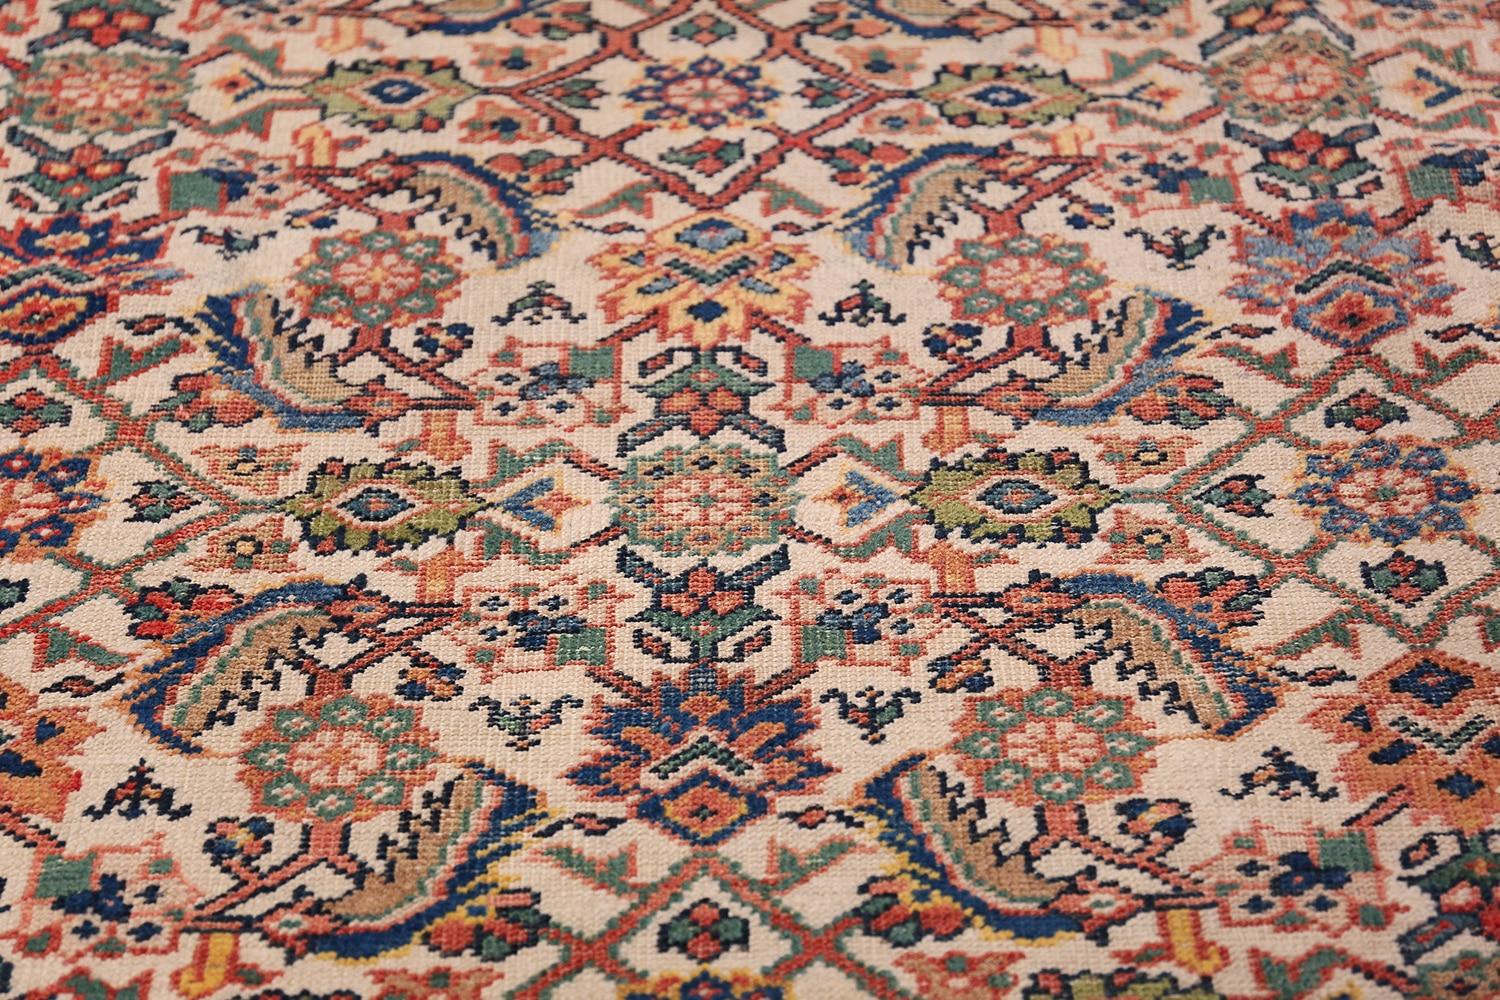 Antique Persian Sultanabad Carpet. Size: 8 ft x 10 ft 7 in (2.44 m x 3.23 m) 2